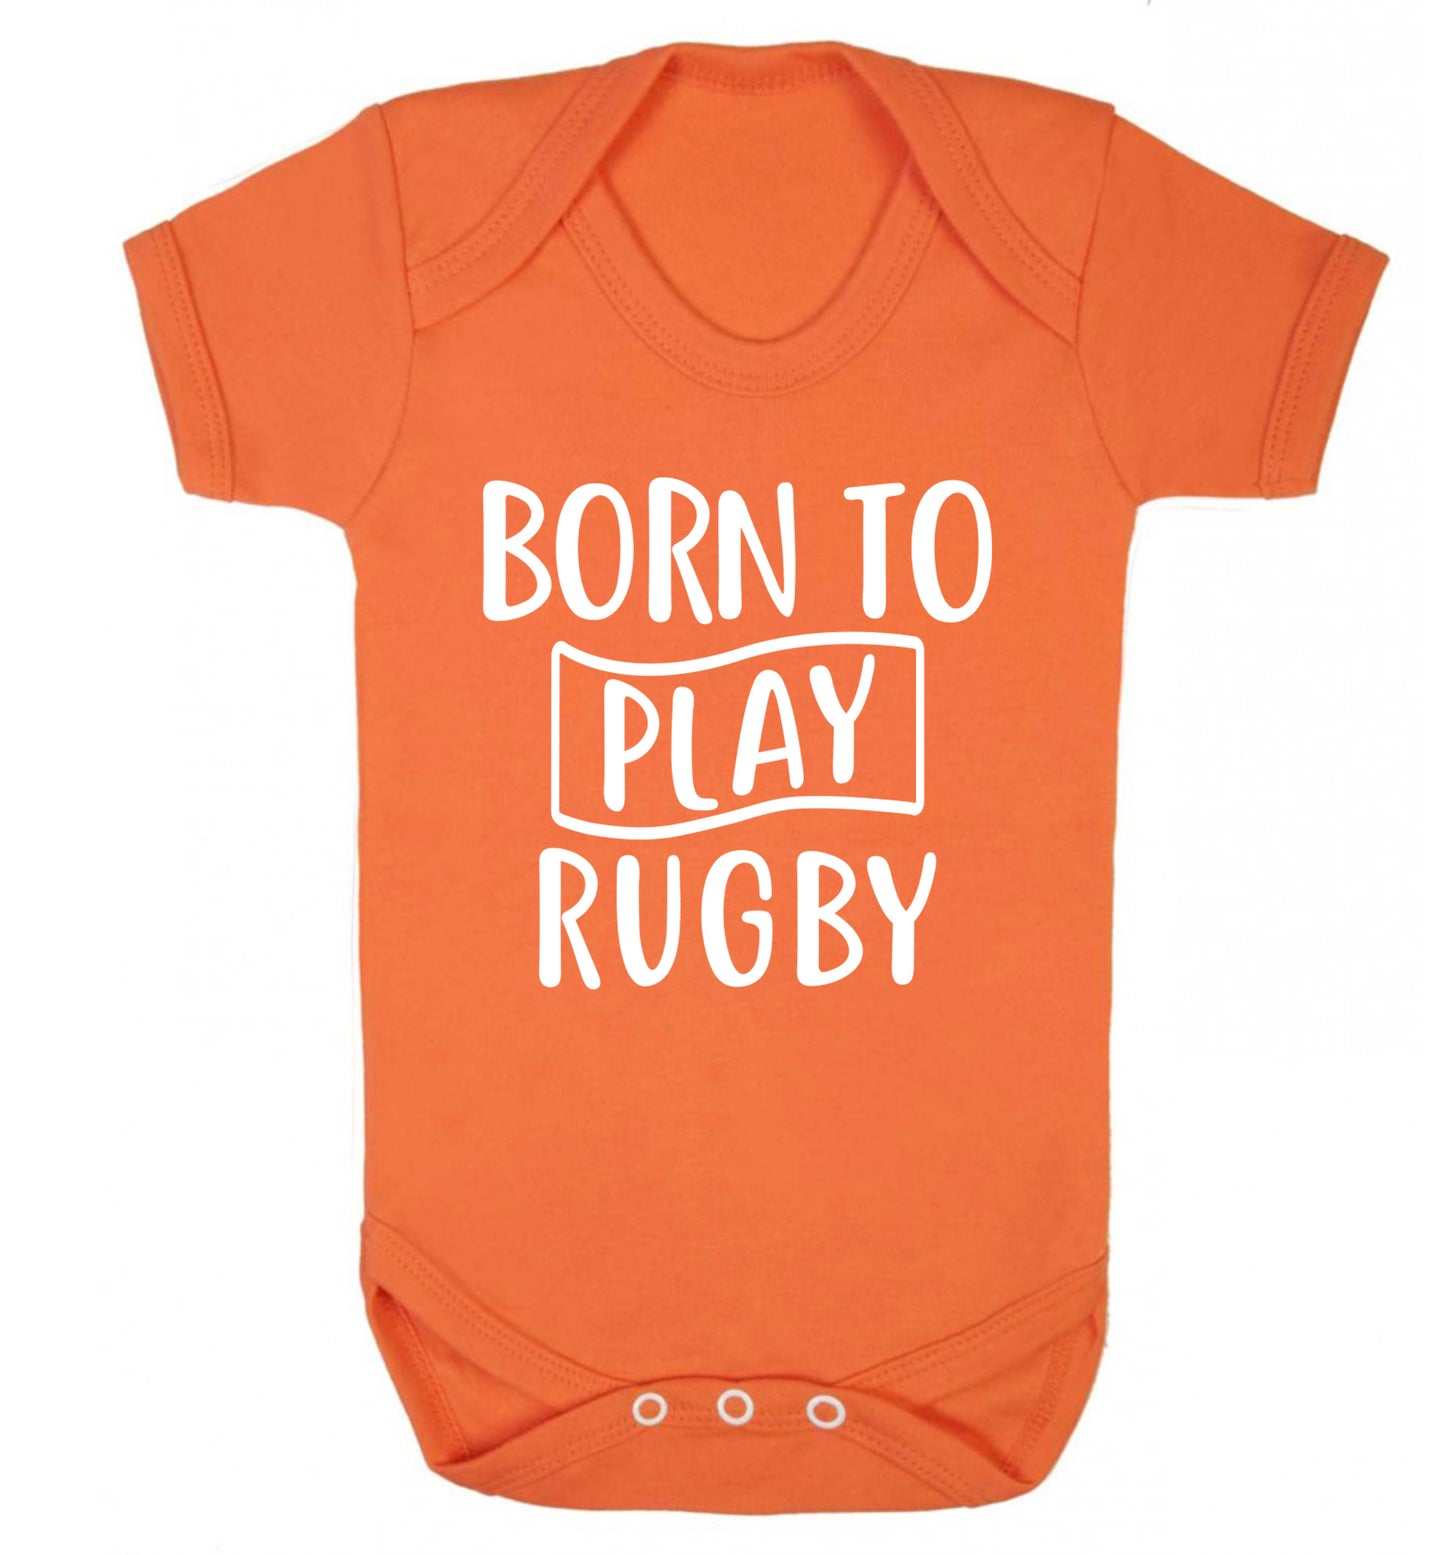 Born to play rugby Baby Vest orange 18-24 months